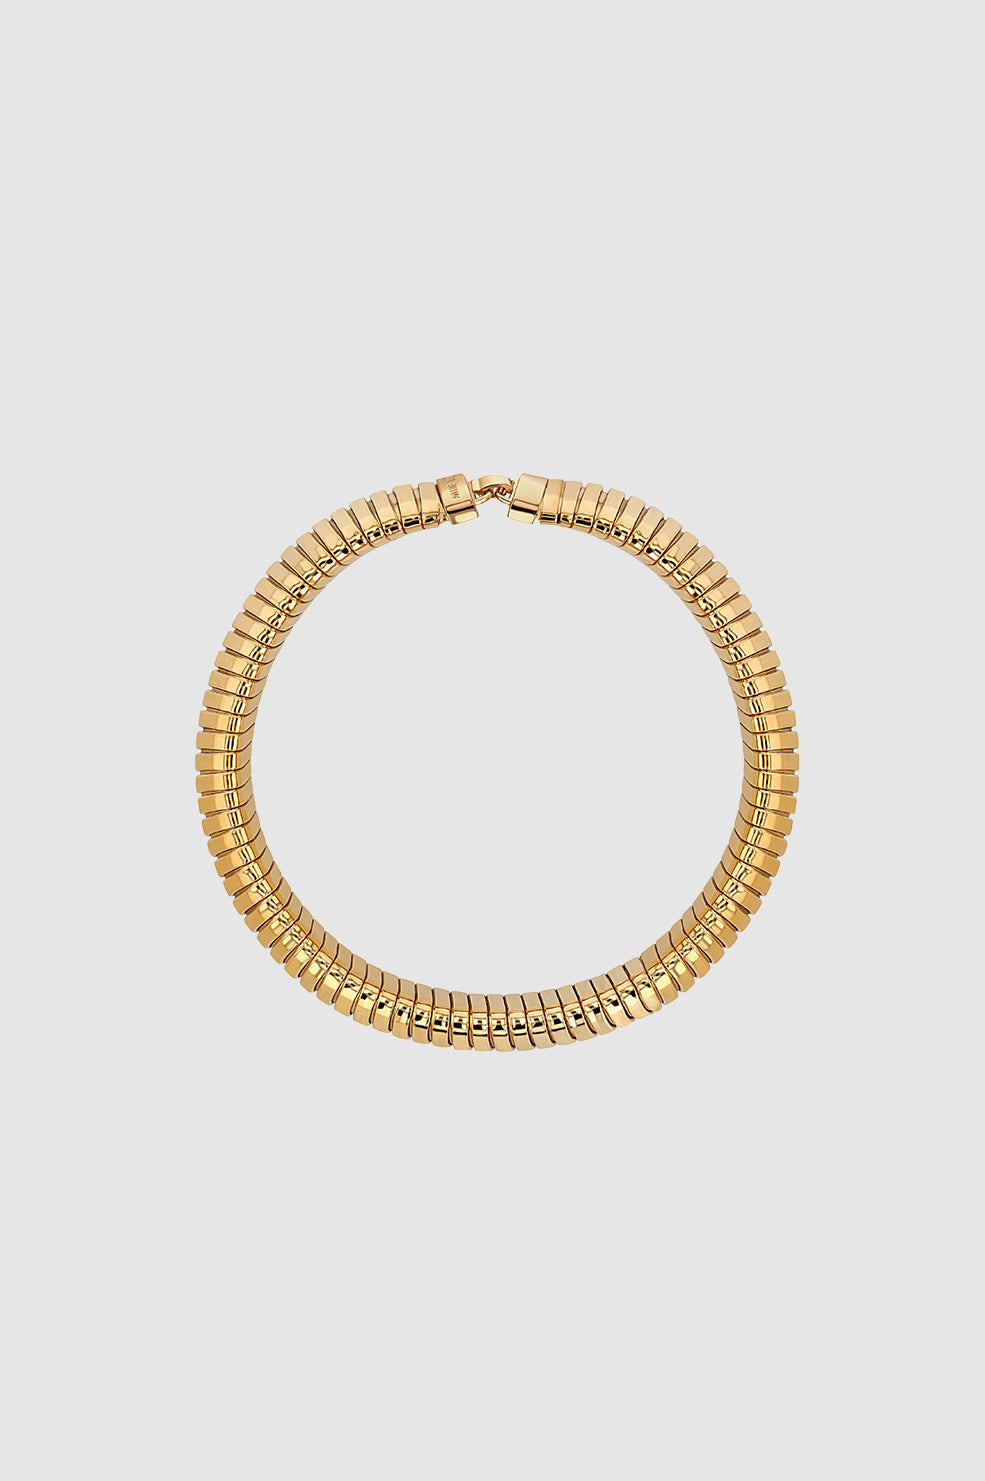 ANINE BING Coil Chain Bracelet - Gold - Top View